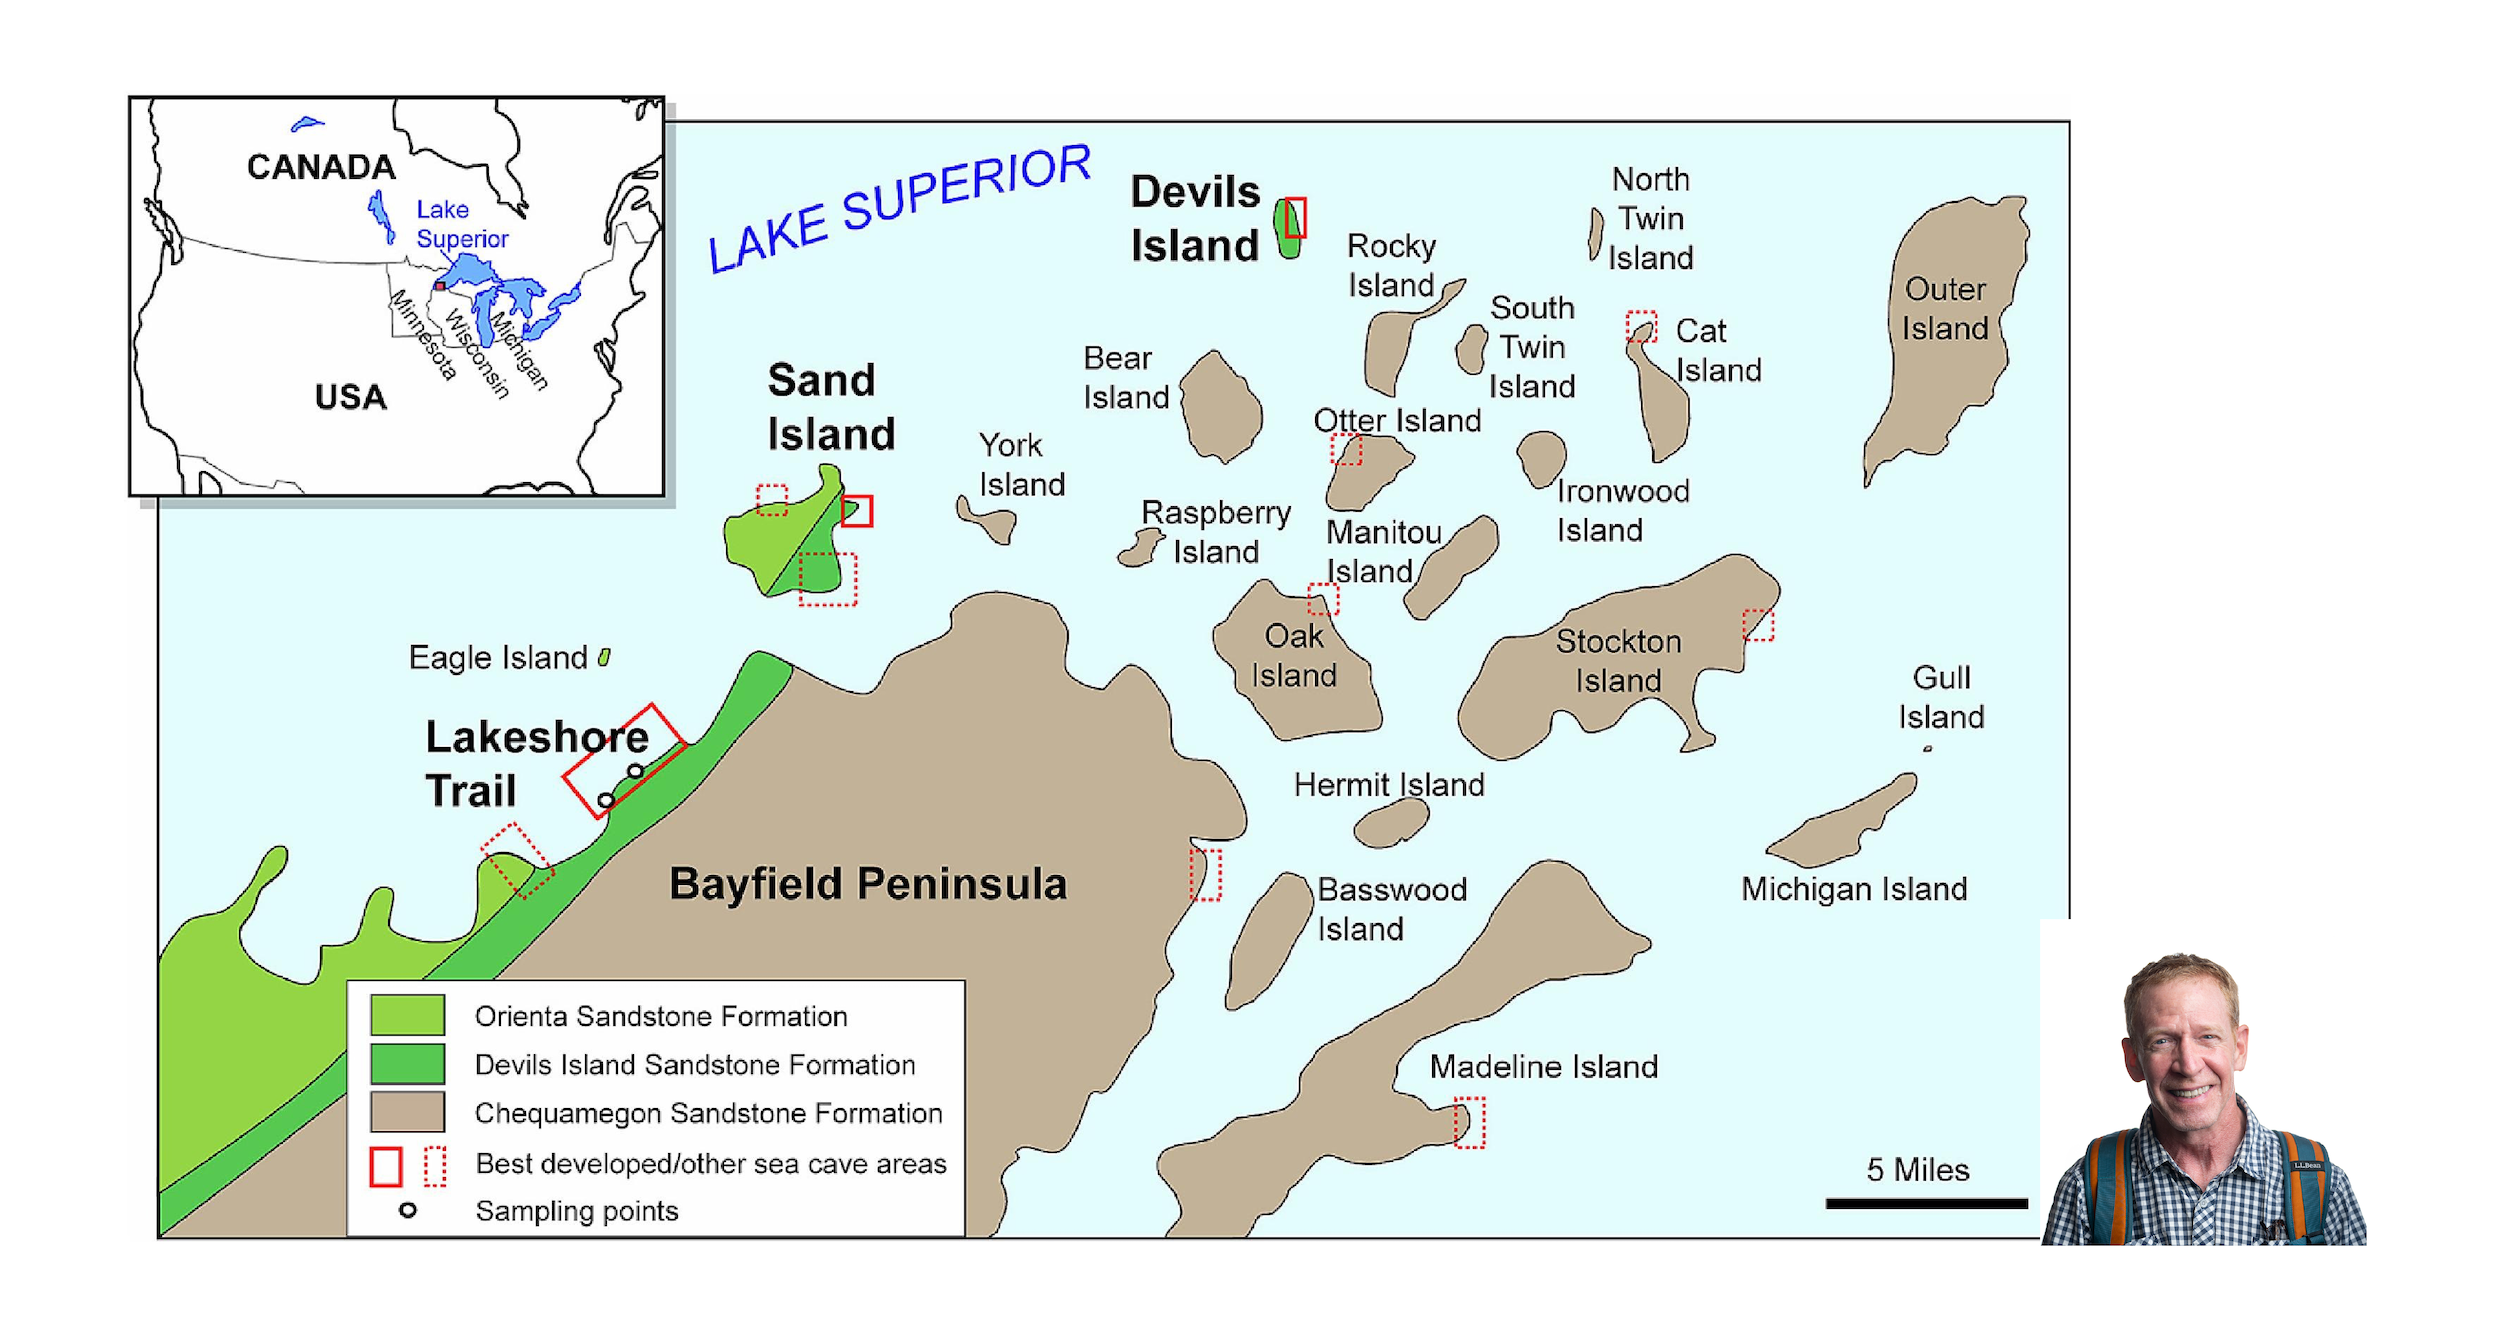 A simplified geological map of the Apostle Islands showing the locations of cliffs with cavities and sea caves.